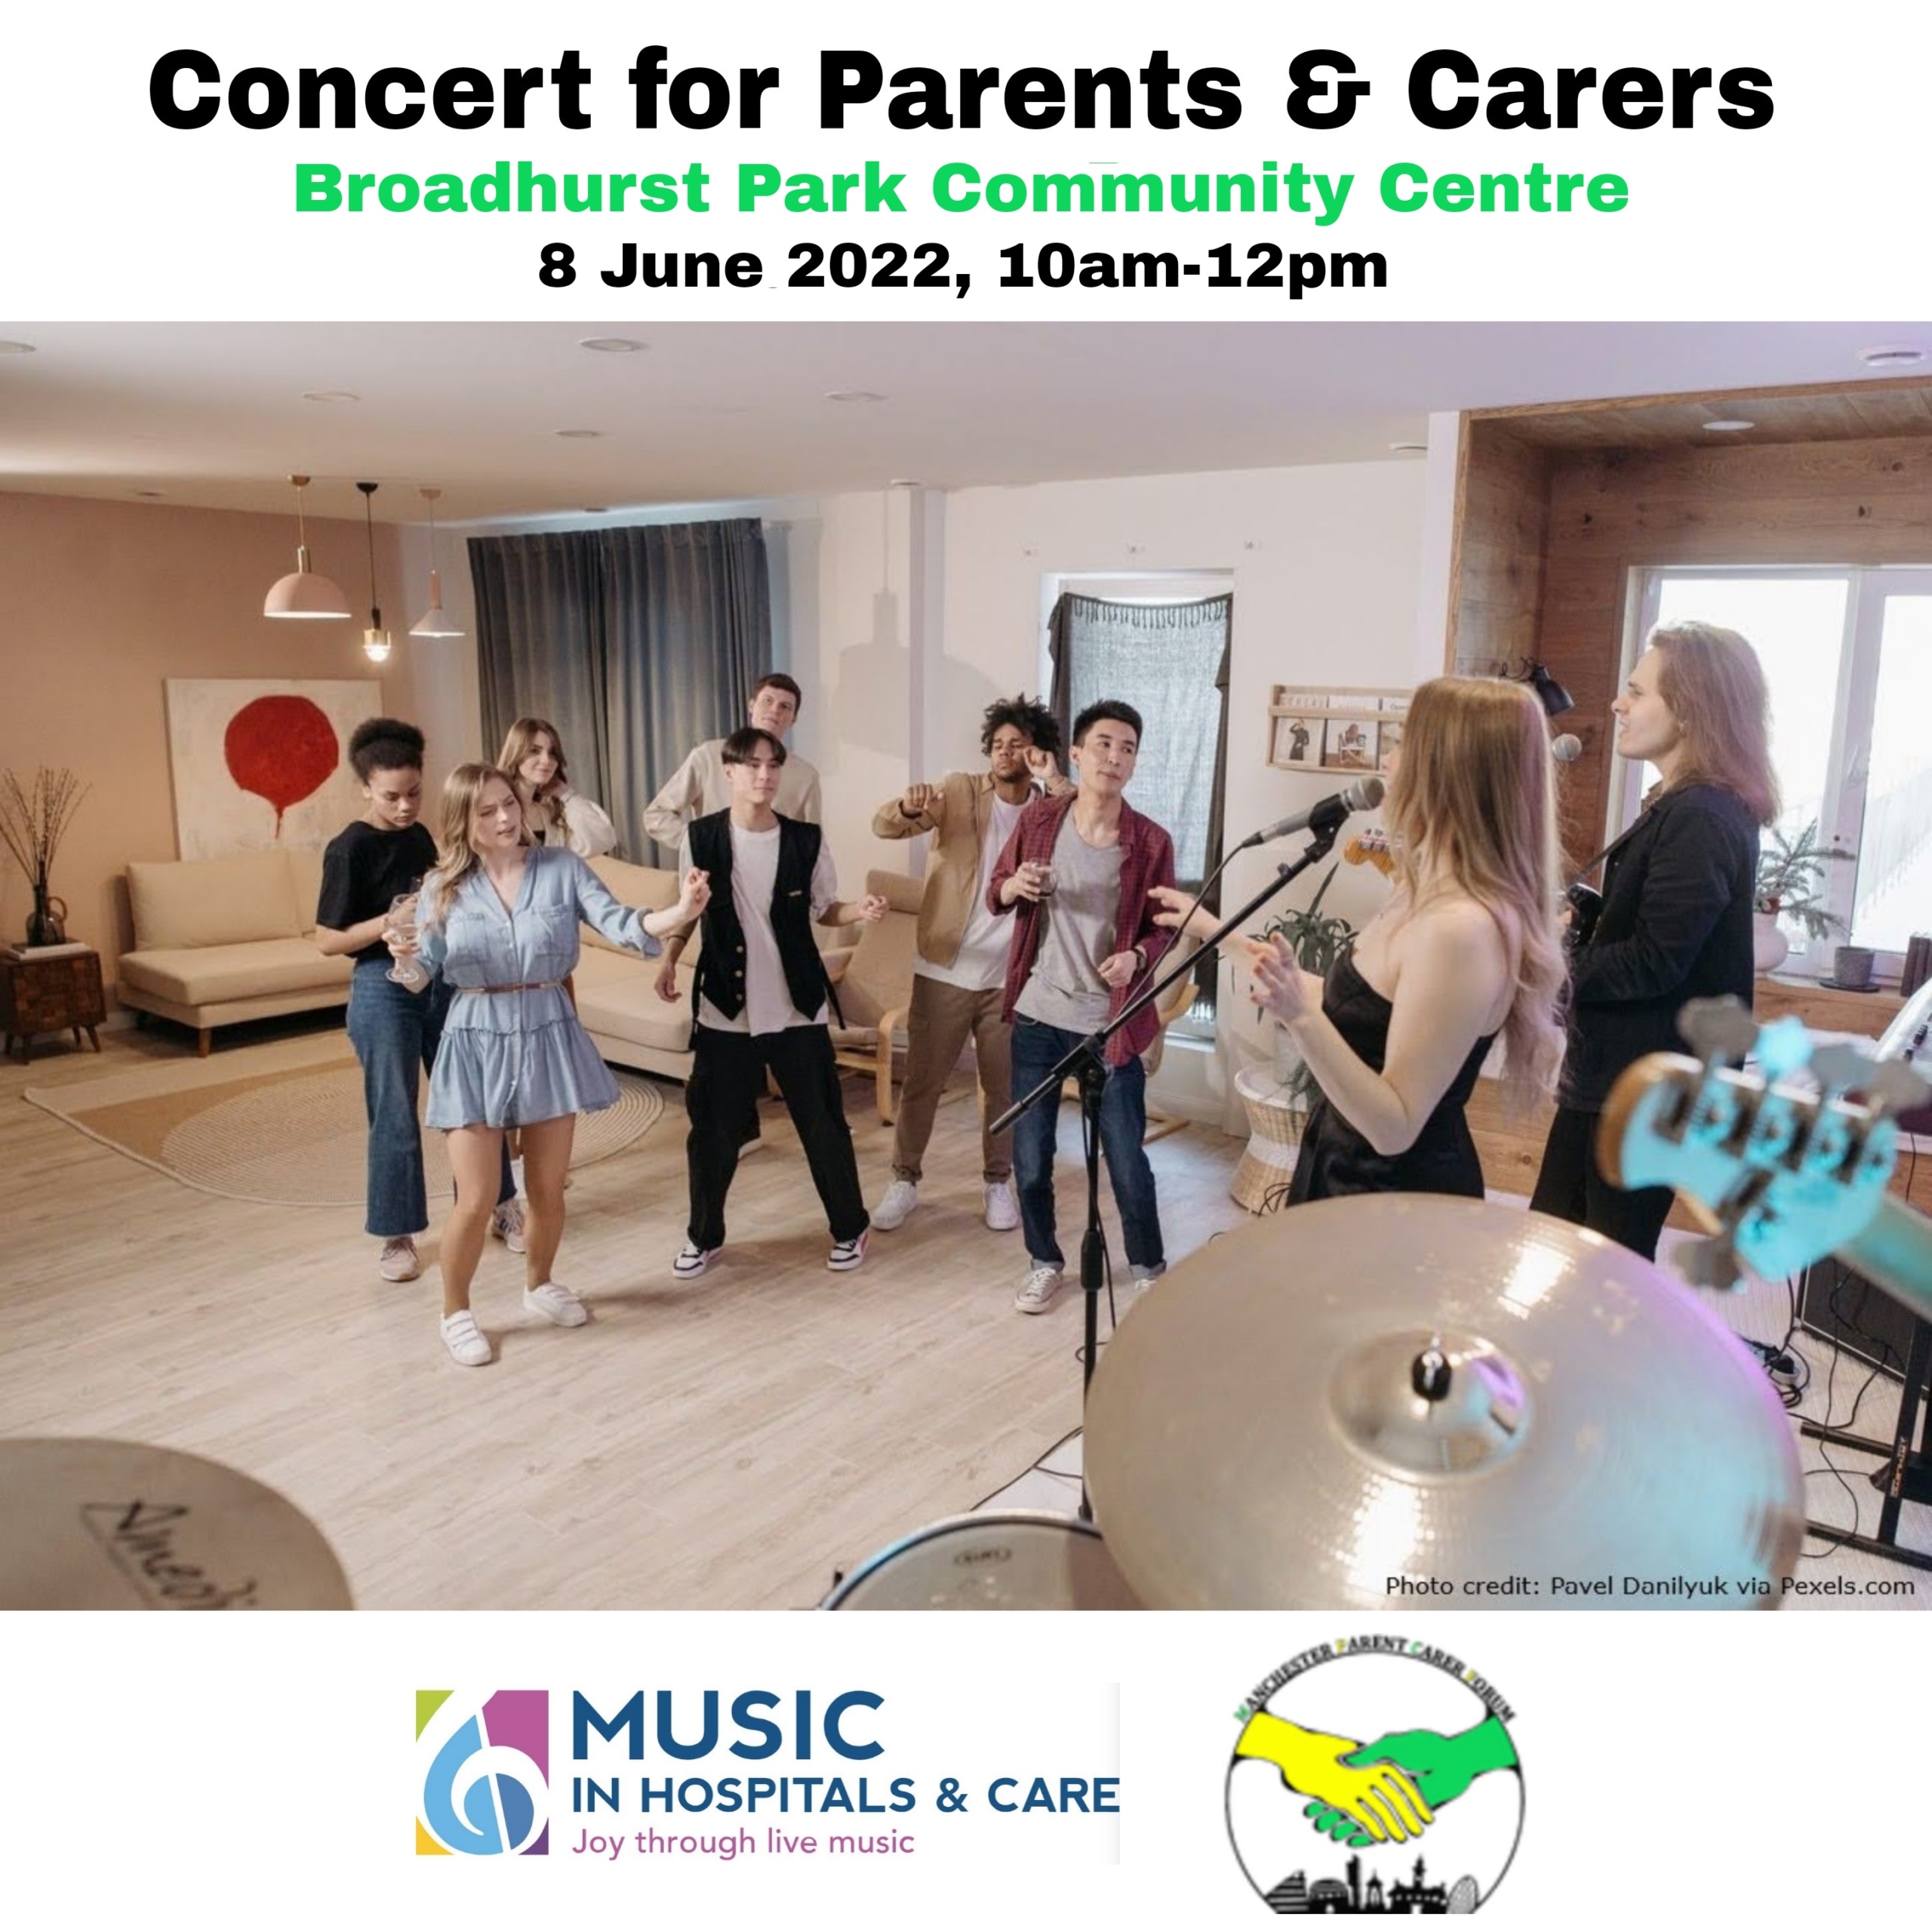 The main photo shows a group of people enjoying a relaxed concert indoors. The top text says "Concert for Parents & Carers", followed by the event details (venue, date, time). The bottom shows MiHC's and MPCF's logos, respectively.